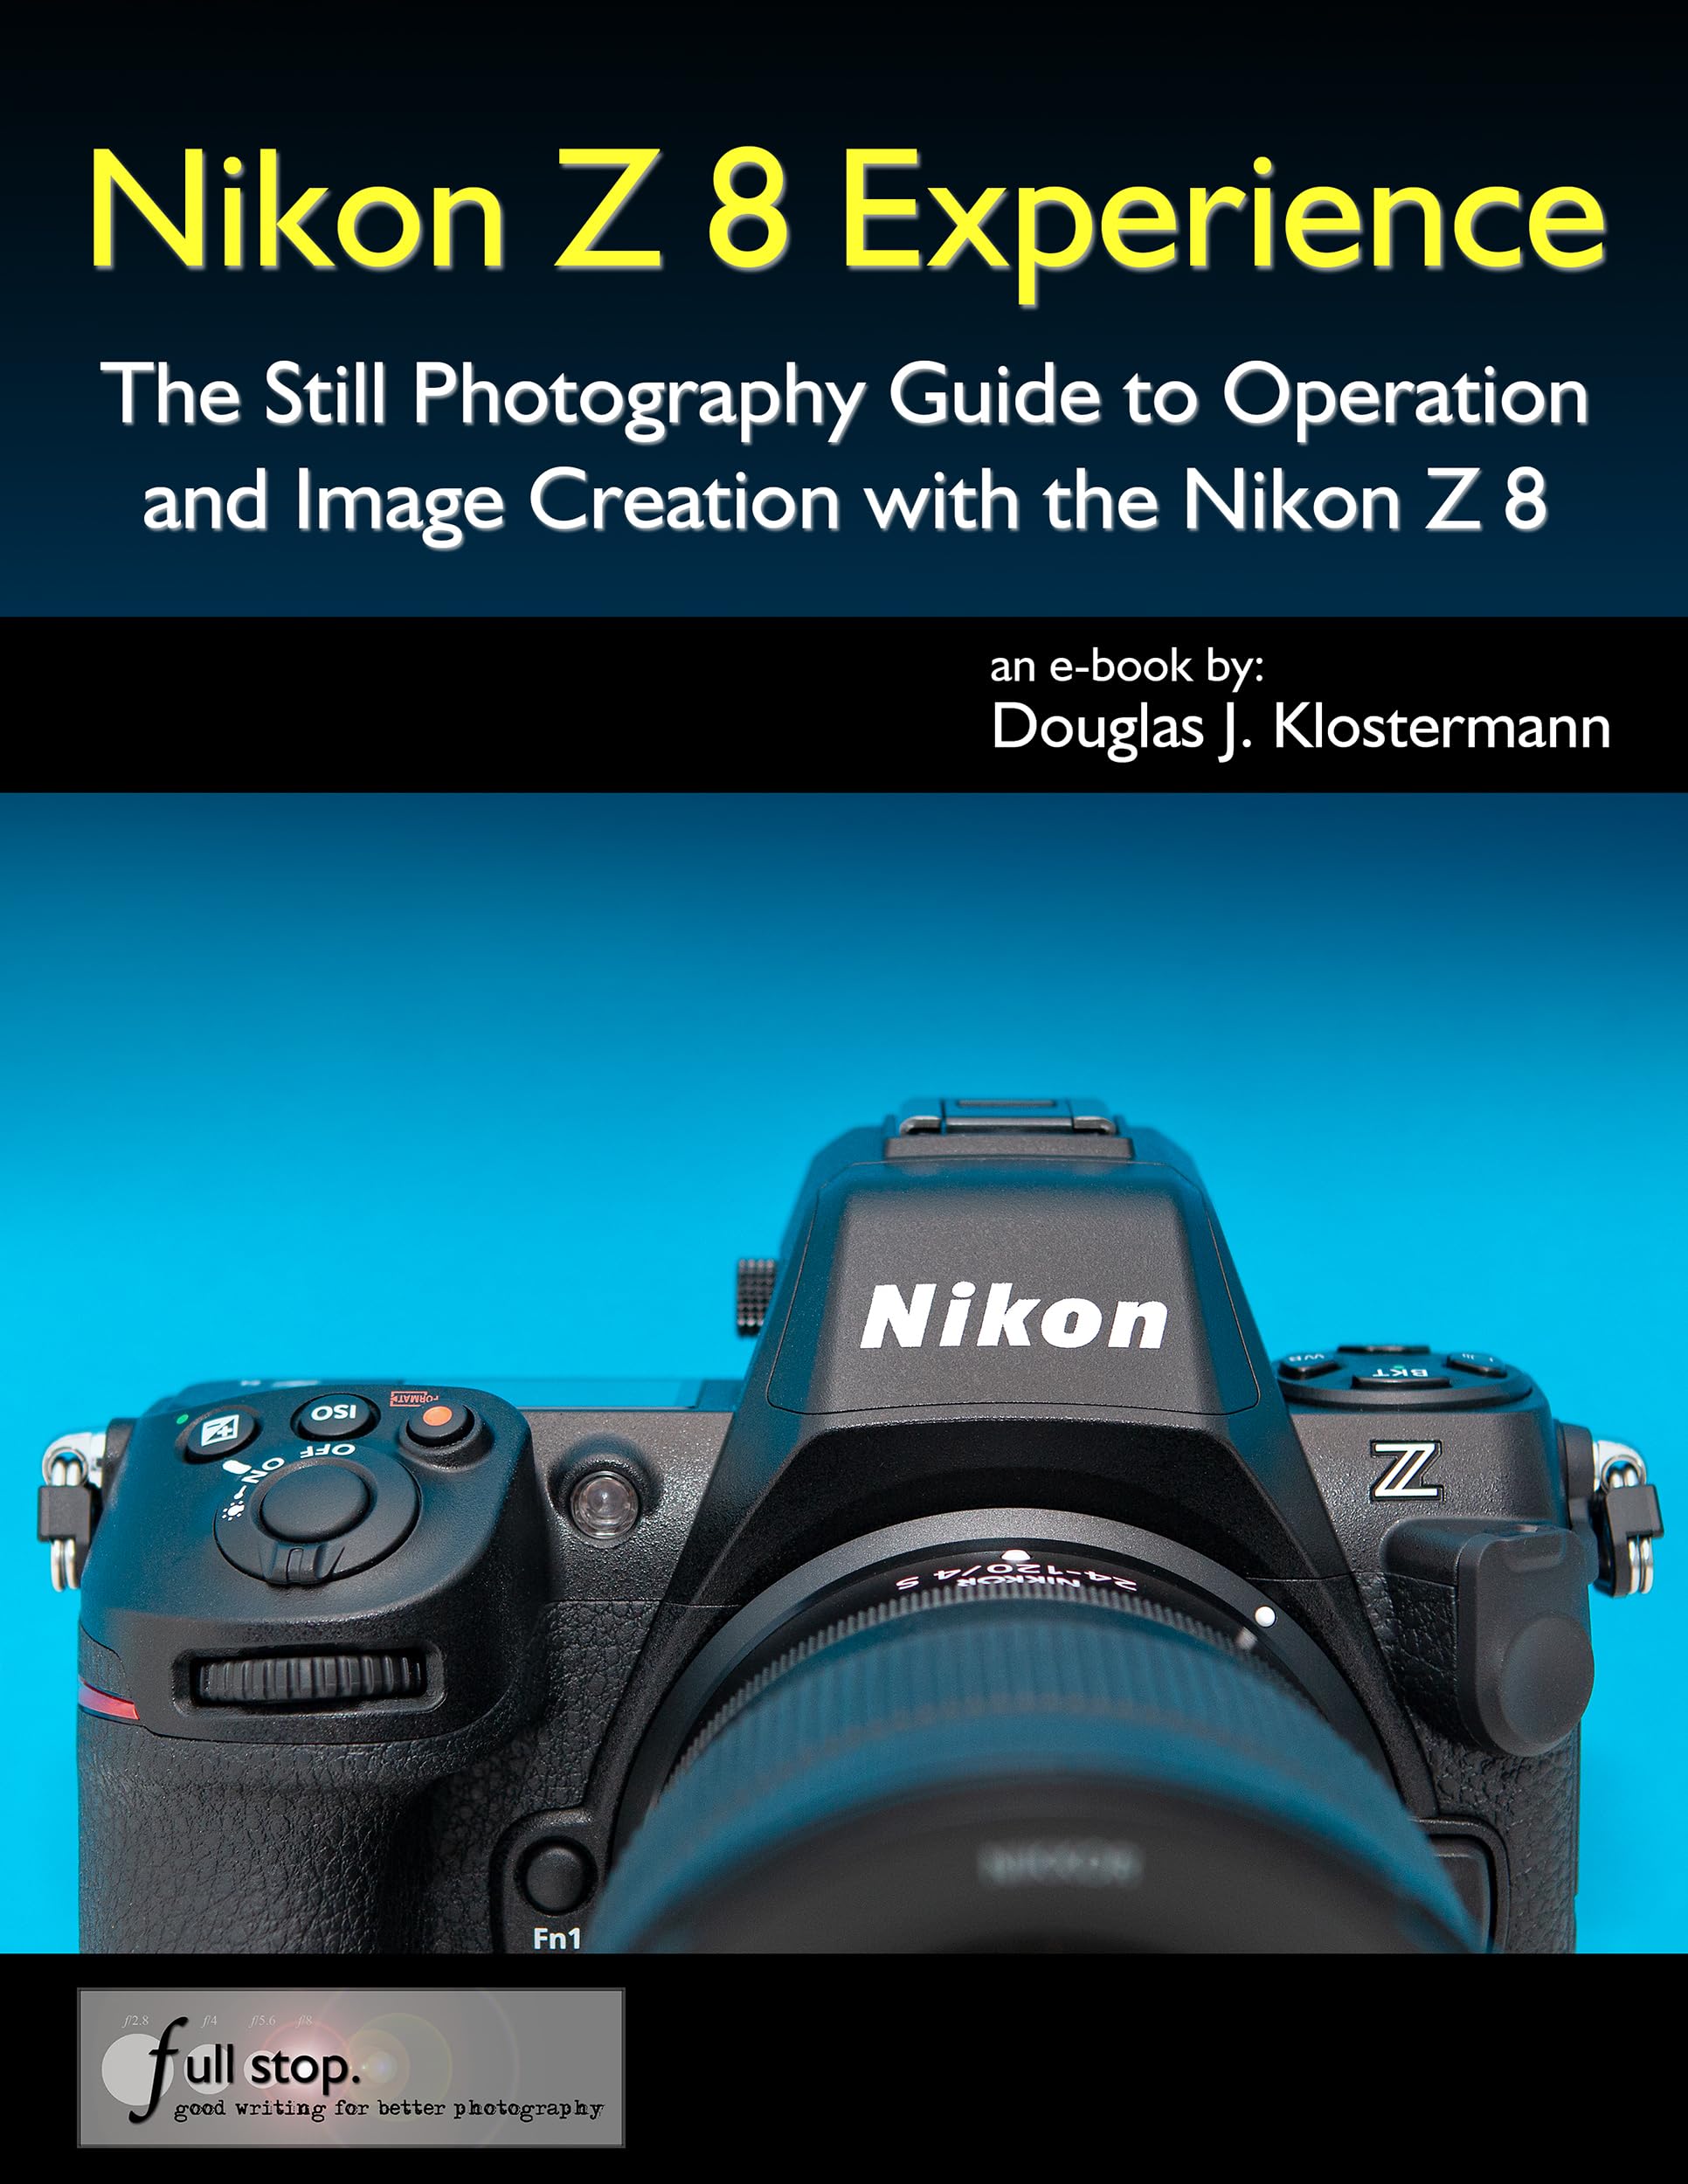 Nikon Z 8 Experience - The Still Photography Guide to Operation and Image Creation with the Nikon Z8